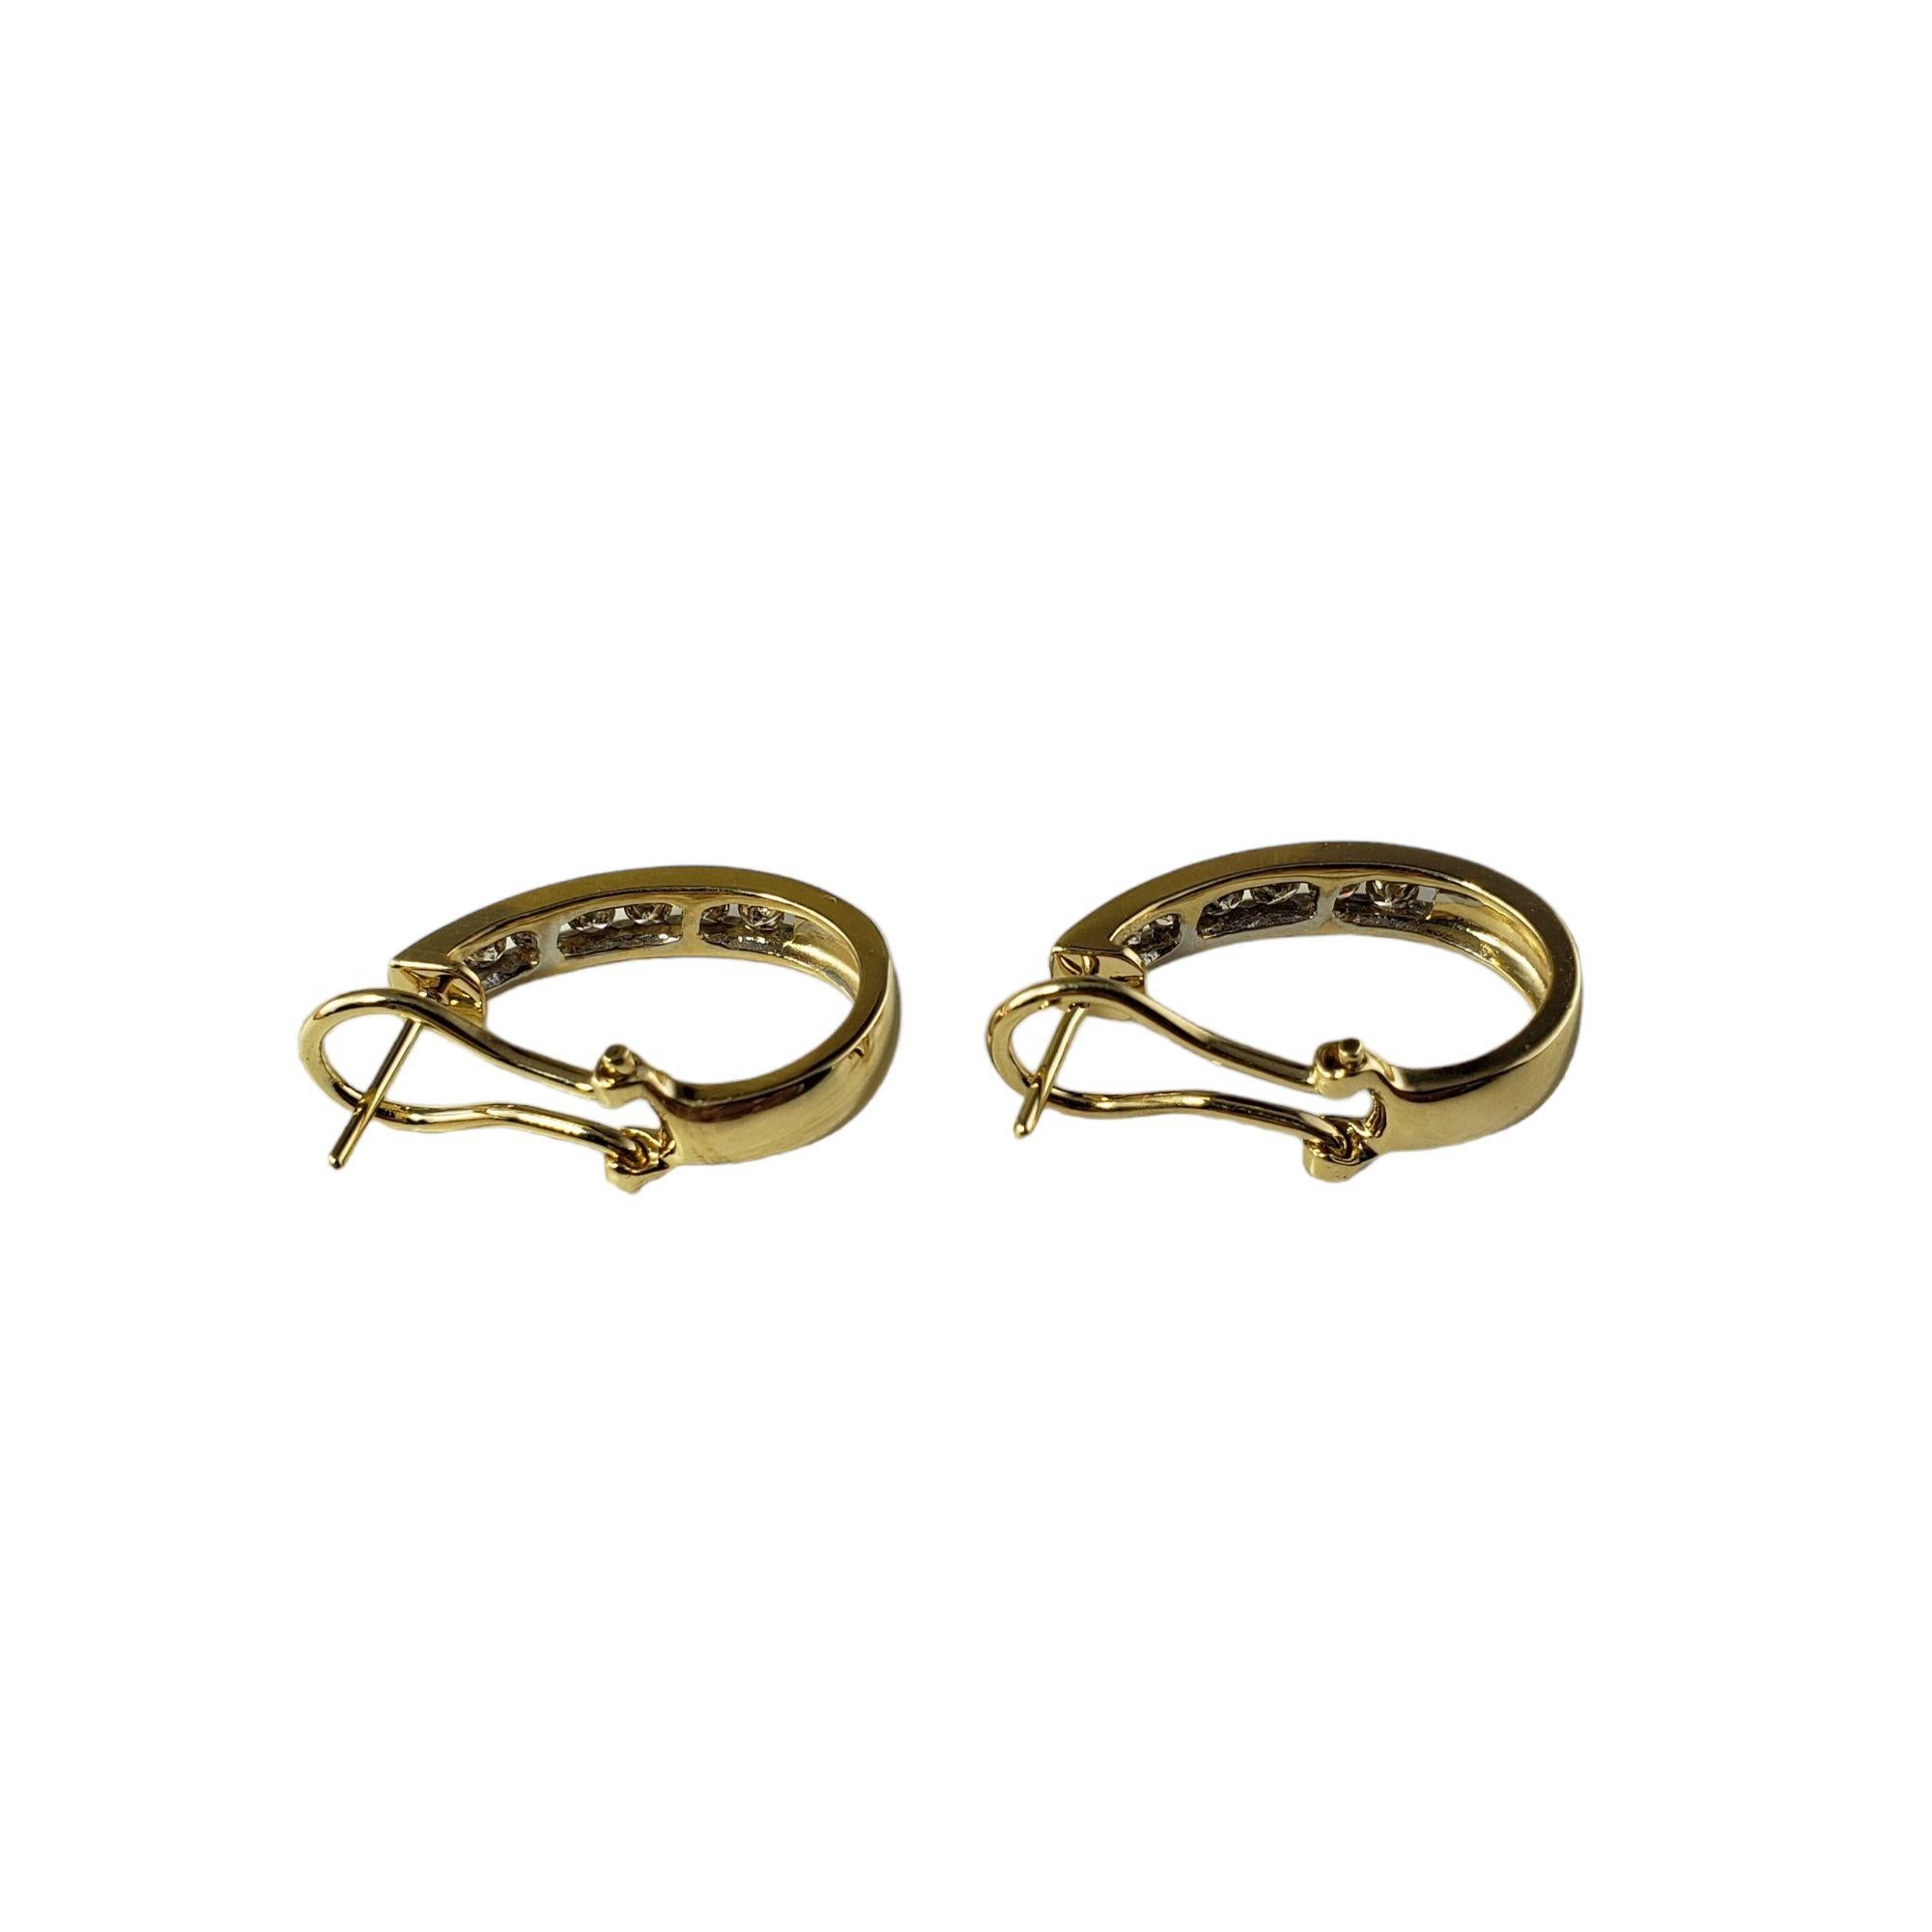 Vintage 14 Karat Yellow Gold and Diamond Cuff Earrings-

These sparkling earrings each feature six round brilliant cut diamonds set in classic 14K yellow gold. Omega back closures.

Approximate total diamond weight: .50 ct.

Diamond color: